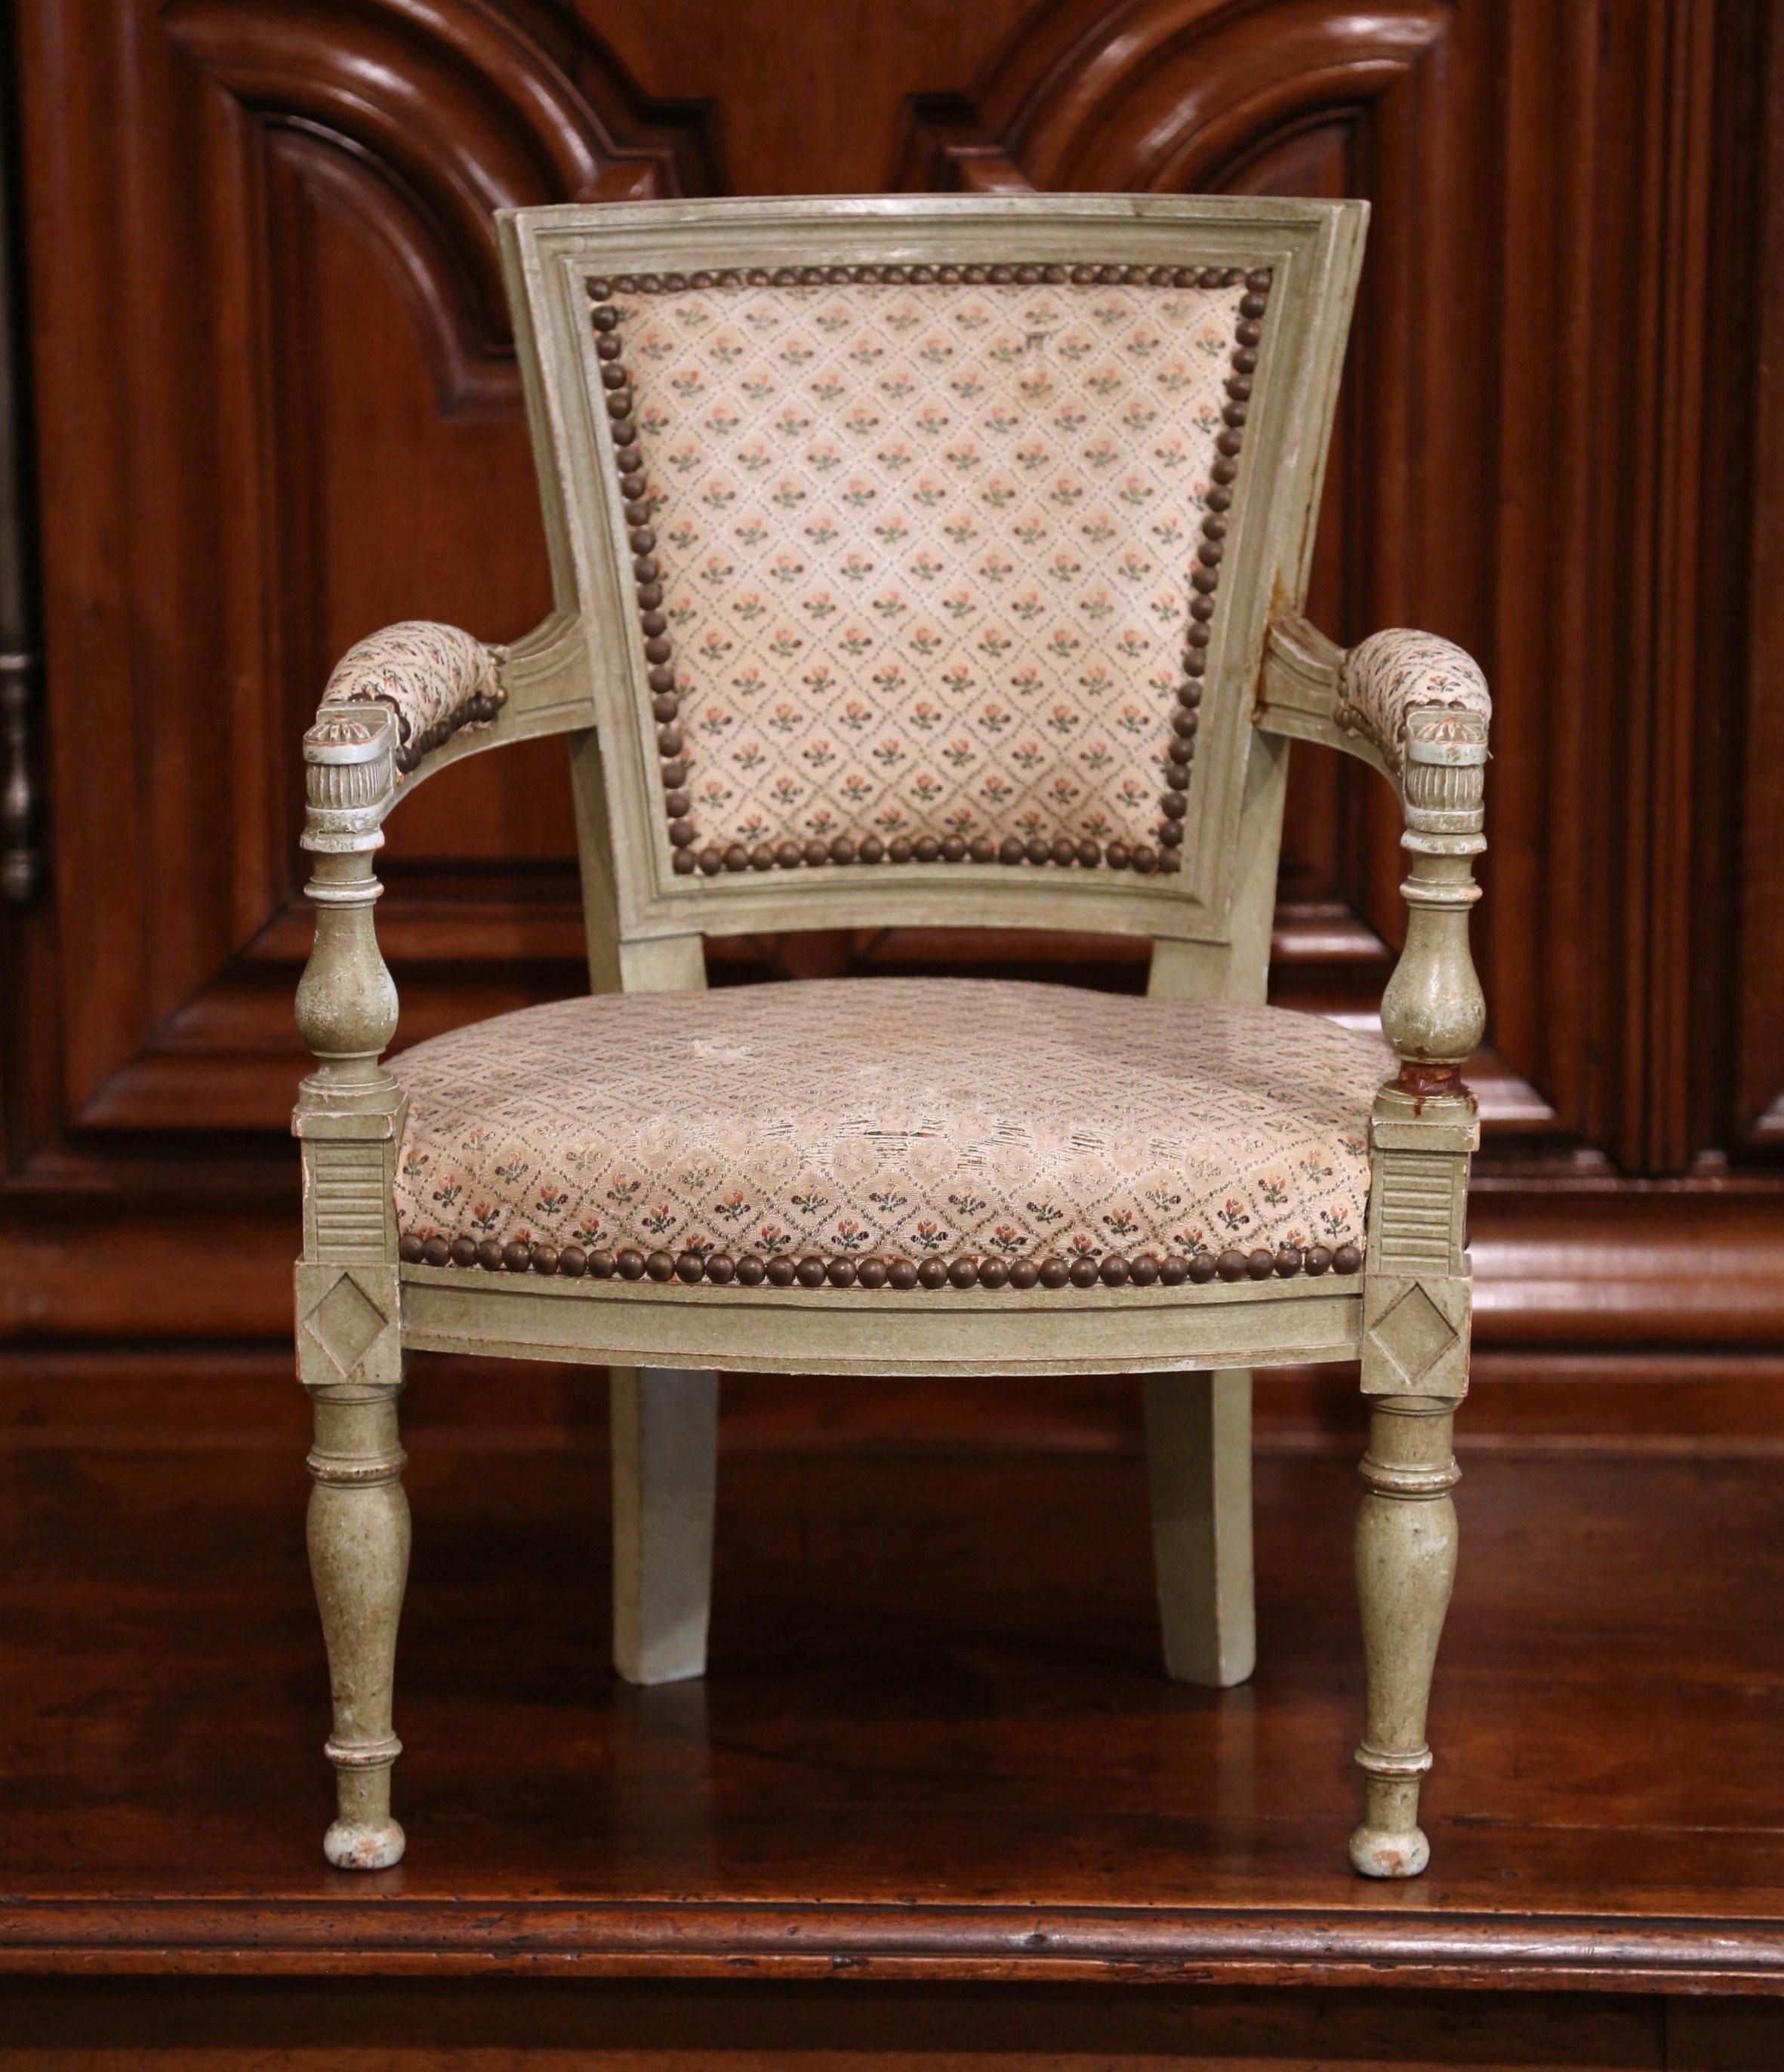 Add charm to a family friendly living room or nursery with this elegant kids armchair. Crafted in France circa 1860, the painted antique chair features a square back, two carved armrests with floral medallions, and delicate turned legs with diamond